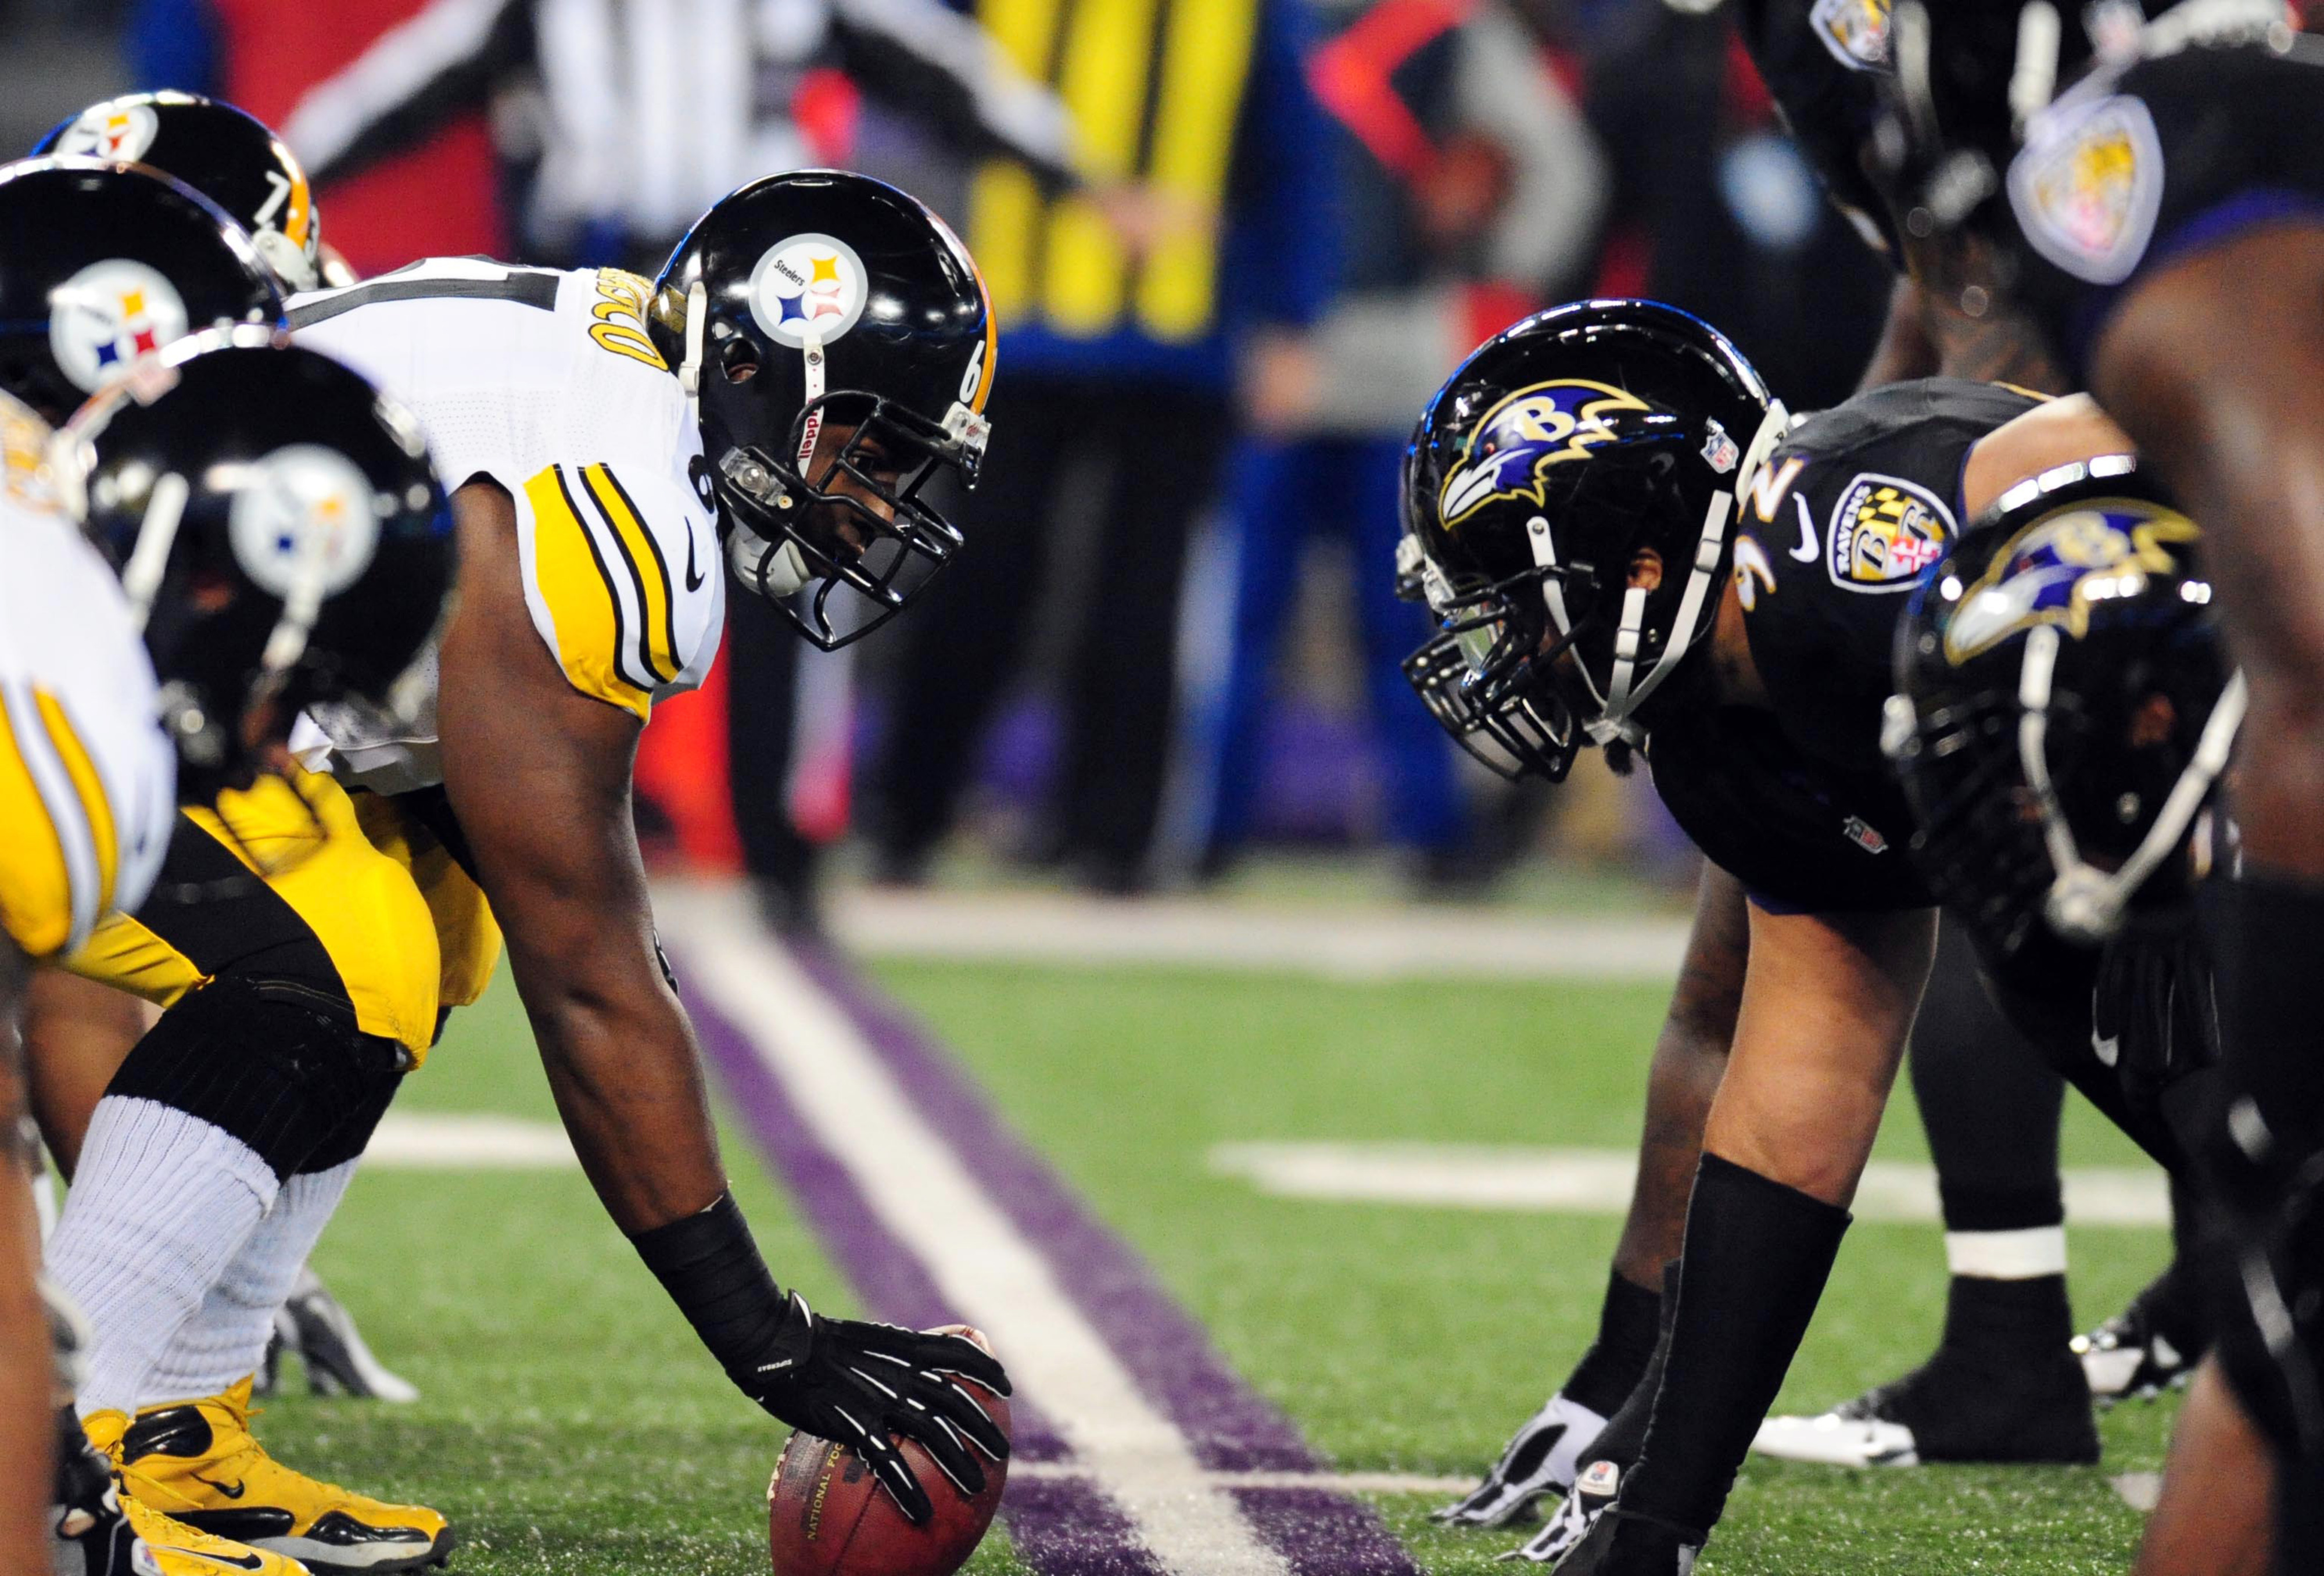 The Steelers travel to Baltimore in an early AFC North showdown.